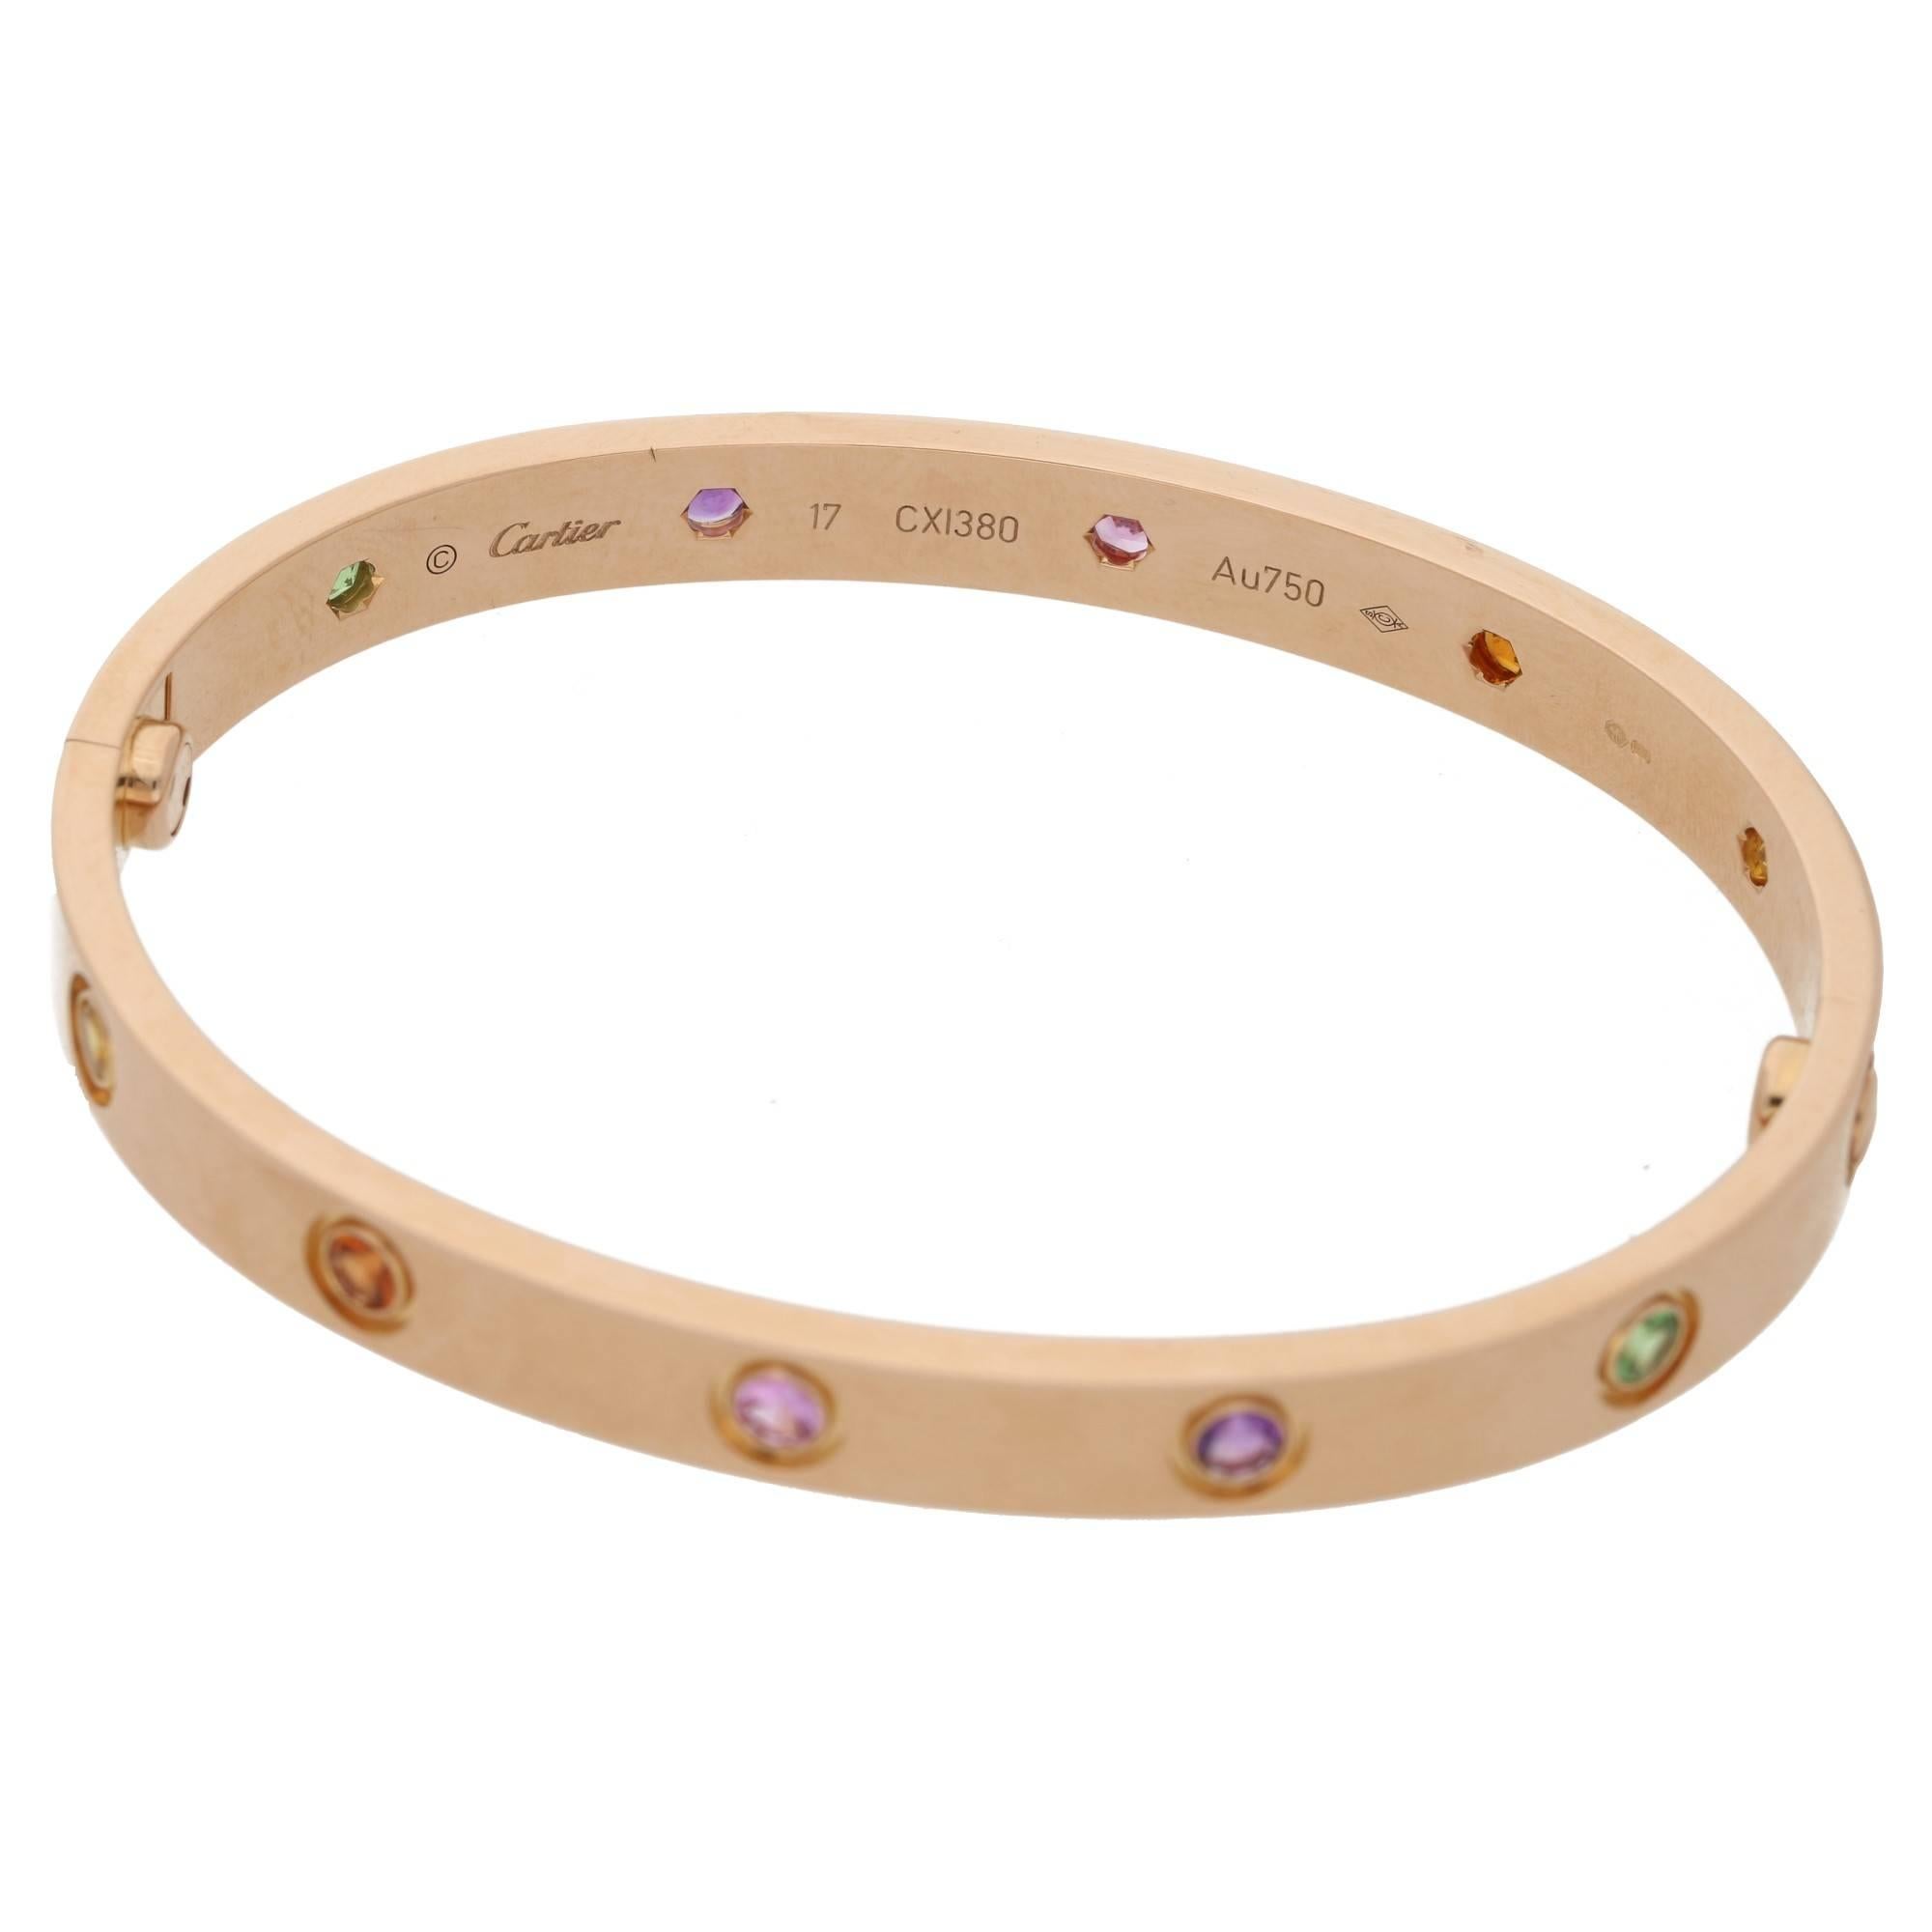 A vibrant 18k rose gold, coloured stone set Cartier bracelet from the Love collection. The bracelet is set with 10 coloured gemstones throughout, including amethyst, yellow sapphires, pink sapphires and green and orange garnets. The bracelet